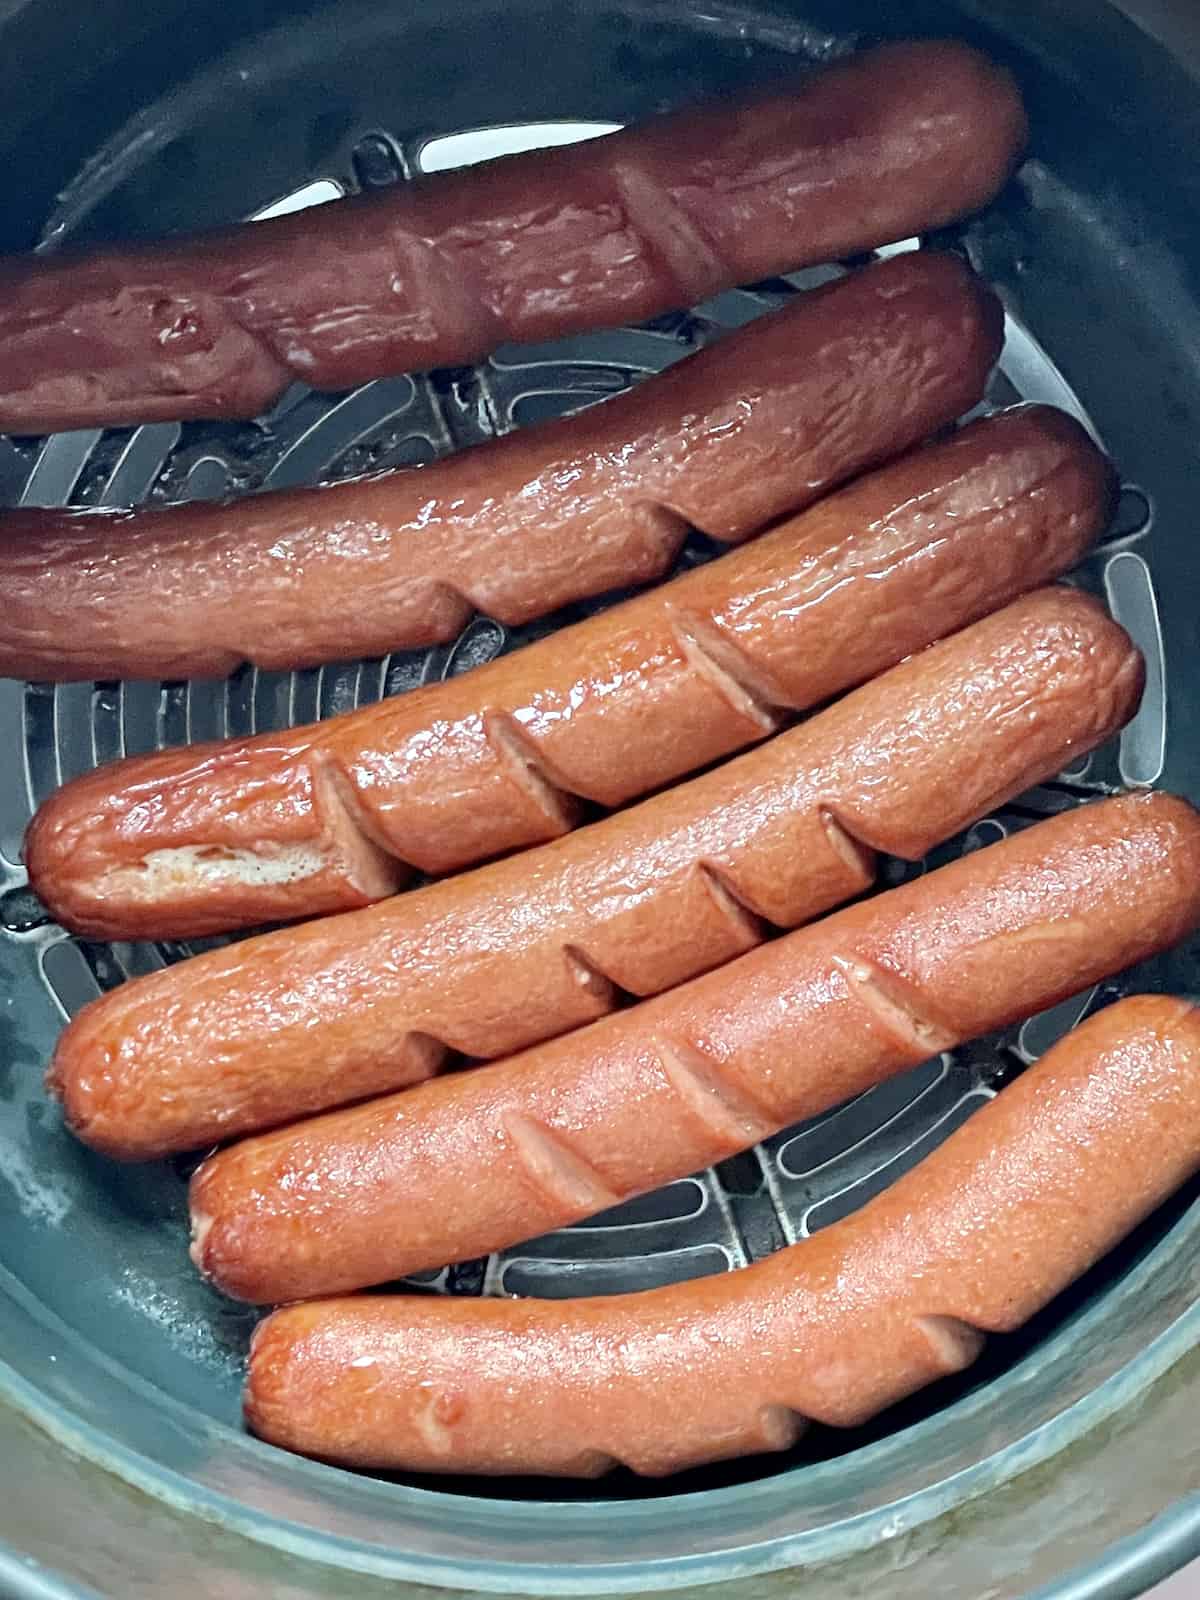 cooked hot dogs in an air fryer